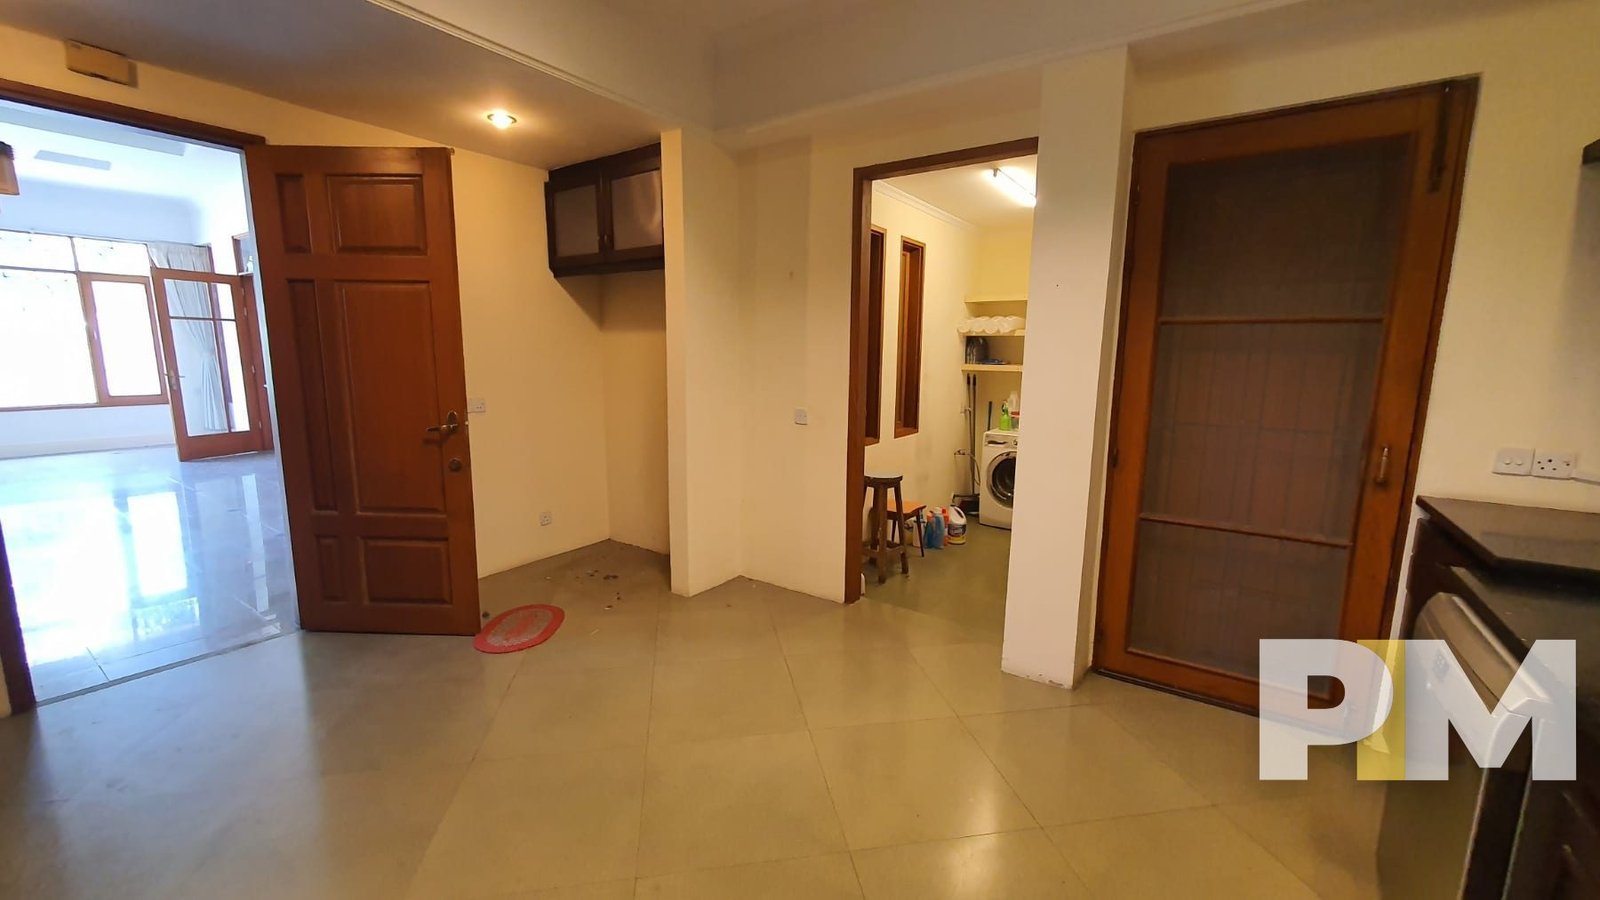 room with laundry space - Yangon Real Estate